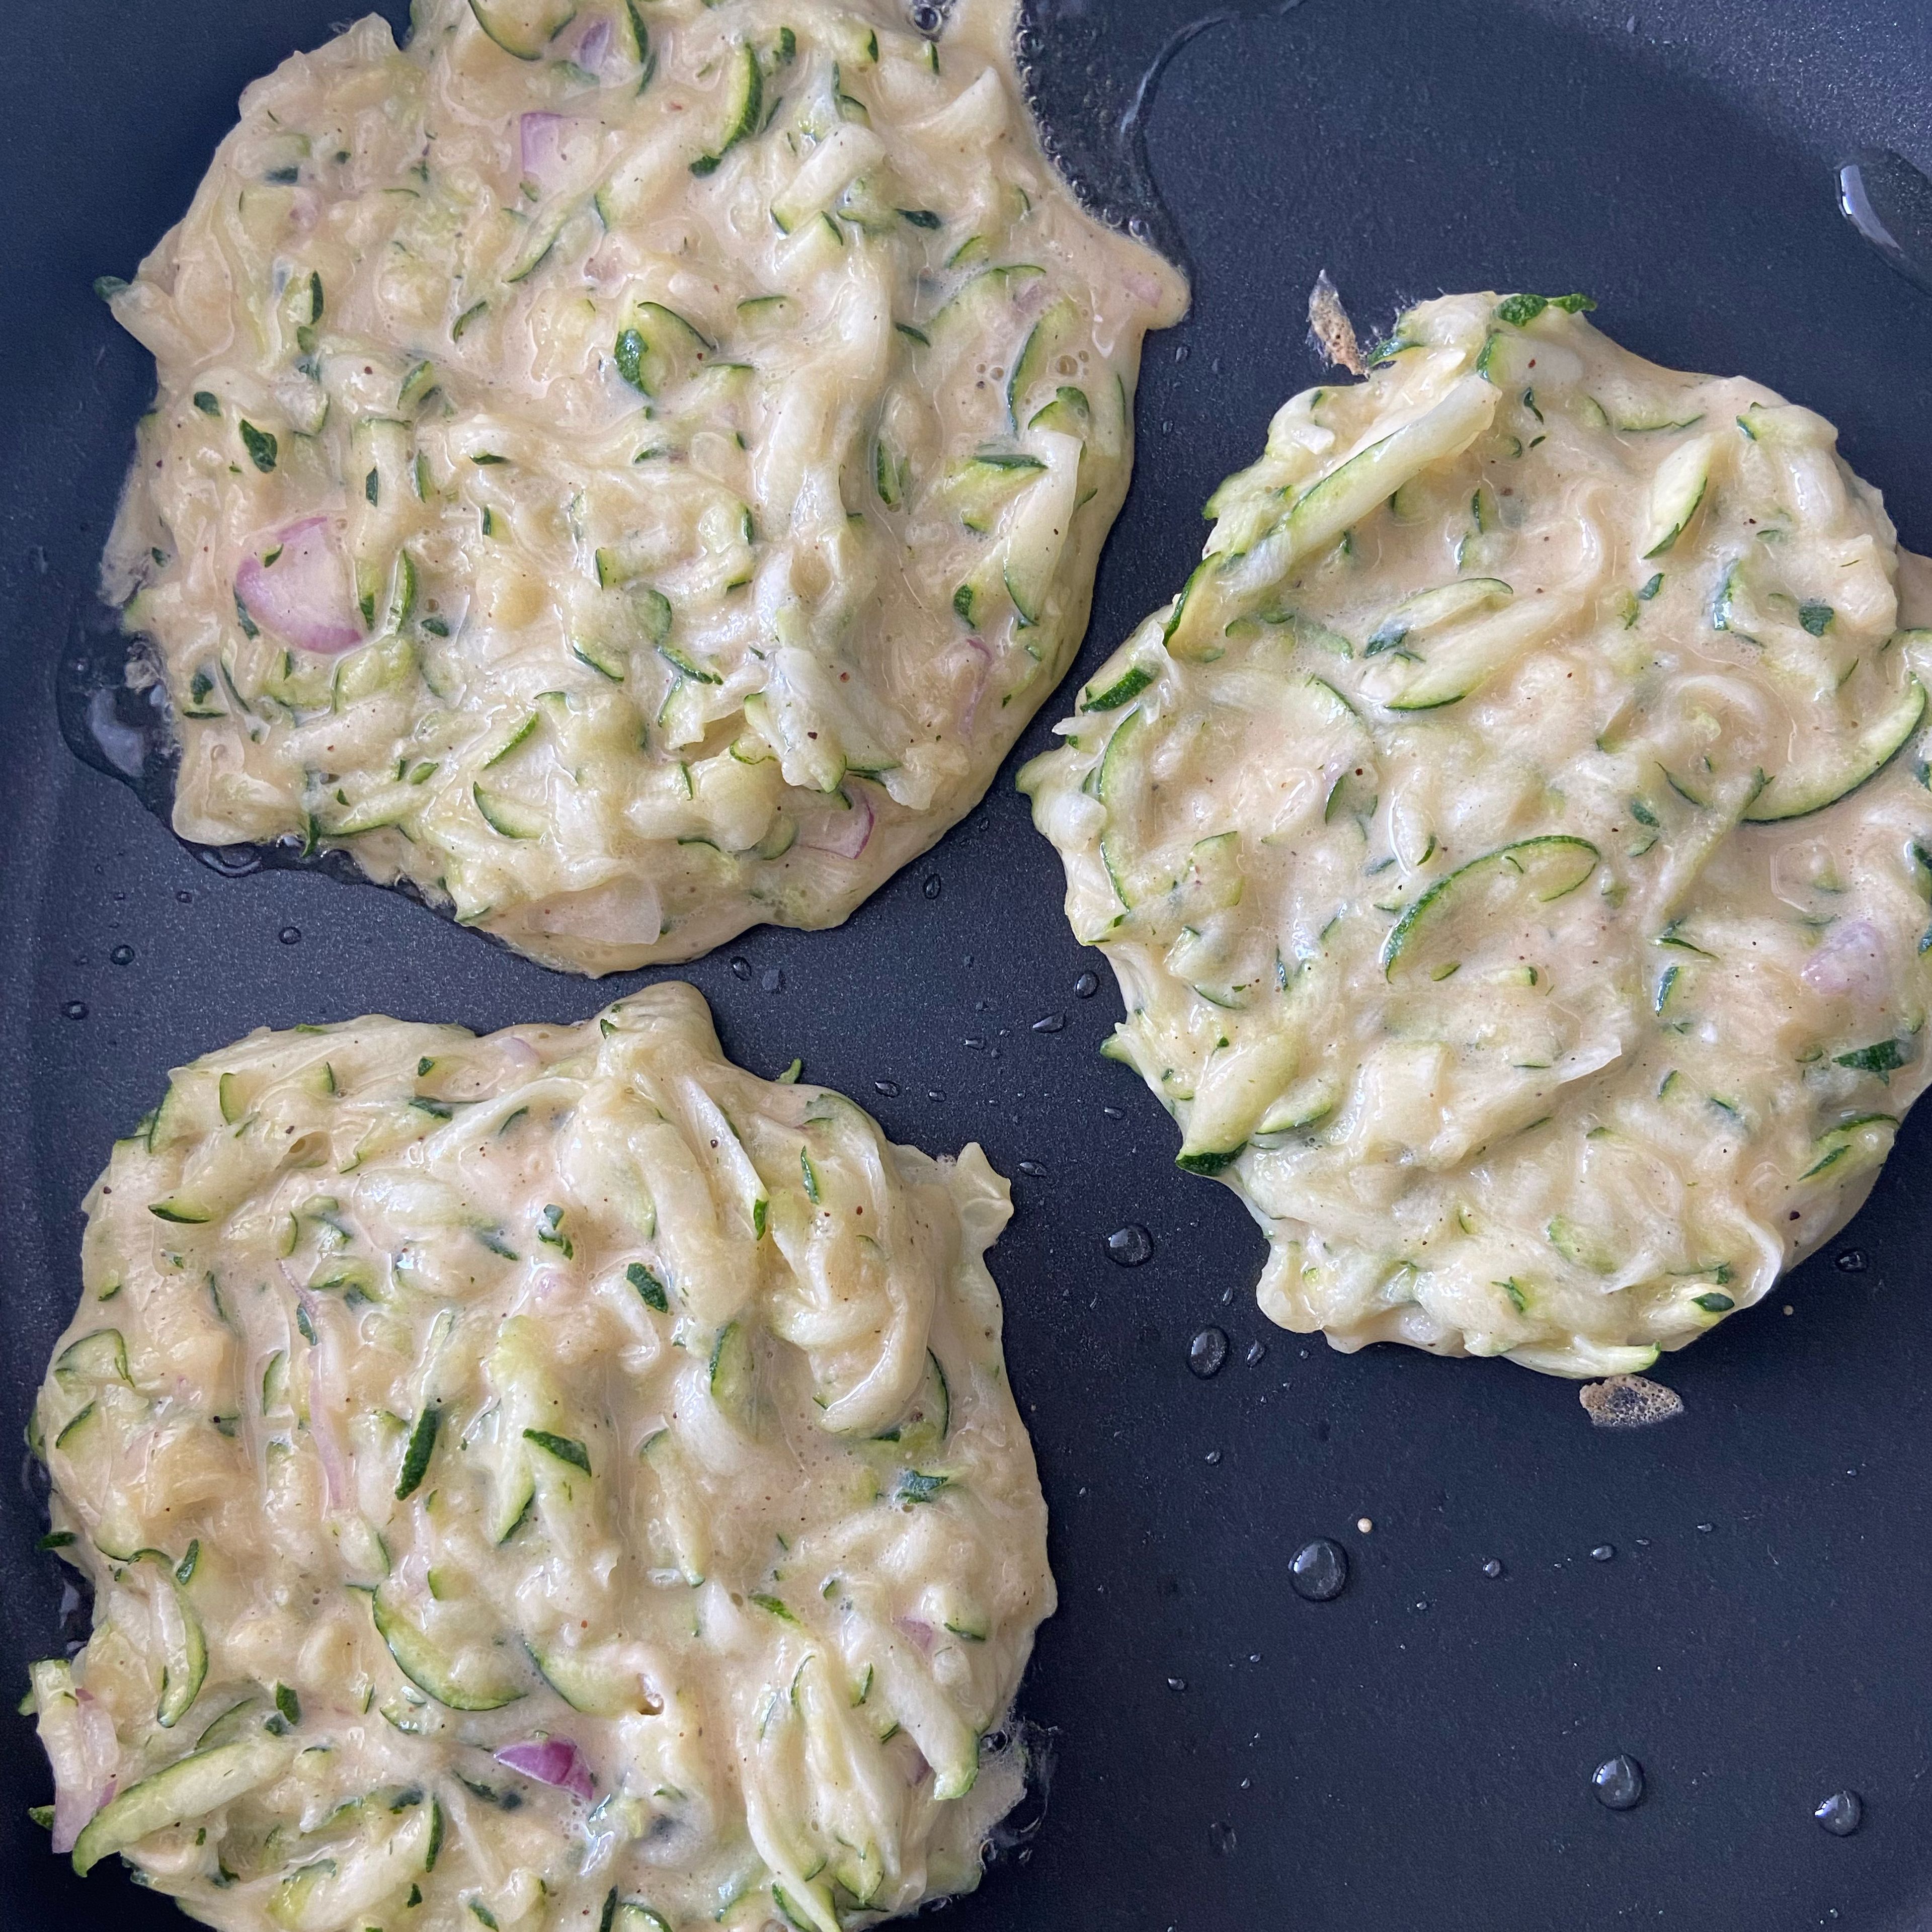 Use a tbsp to scoop zucchini mixture to the pan.